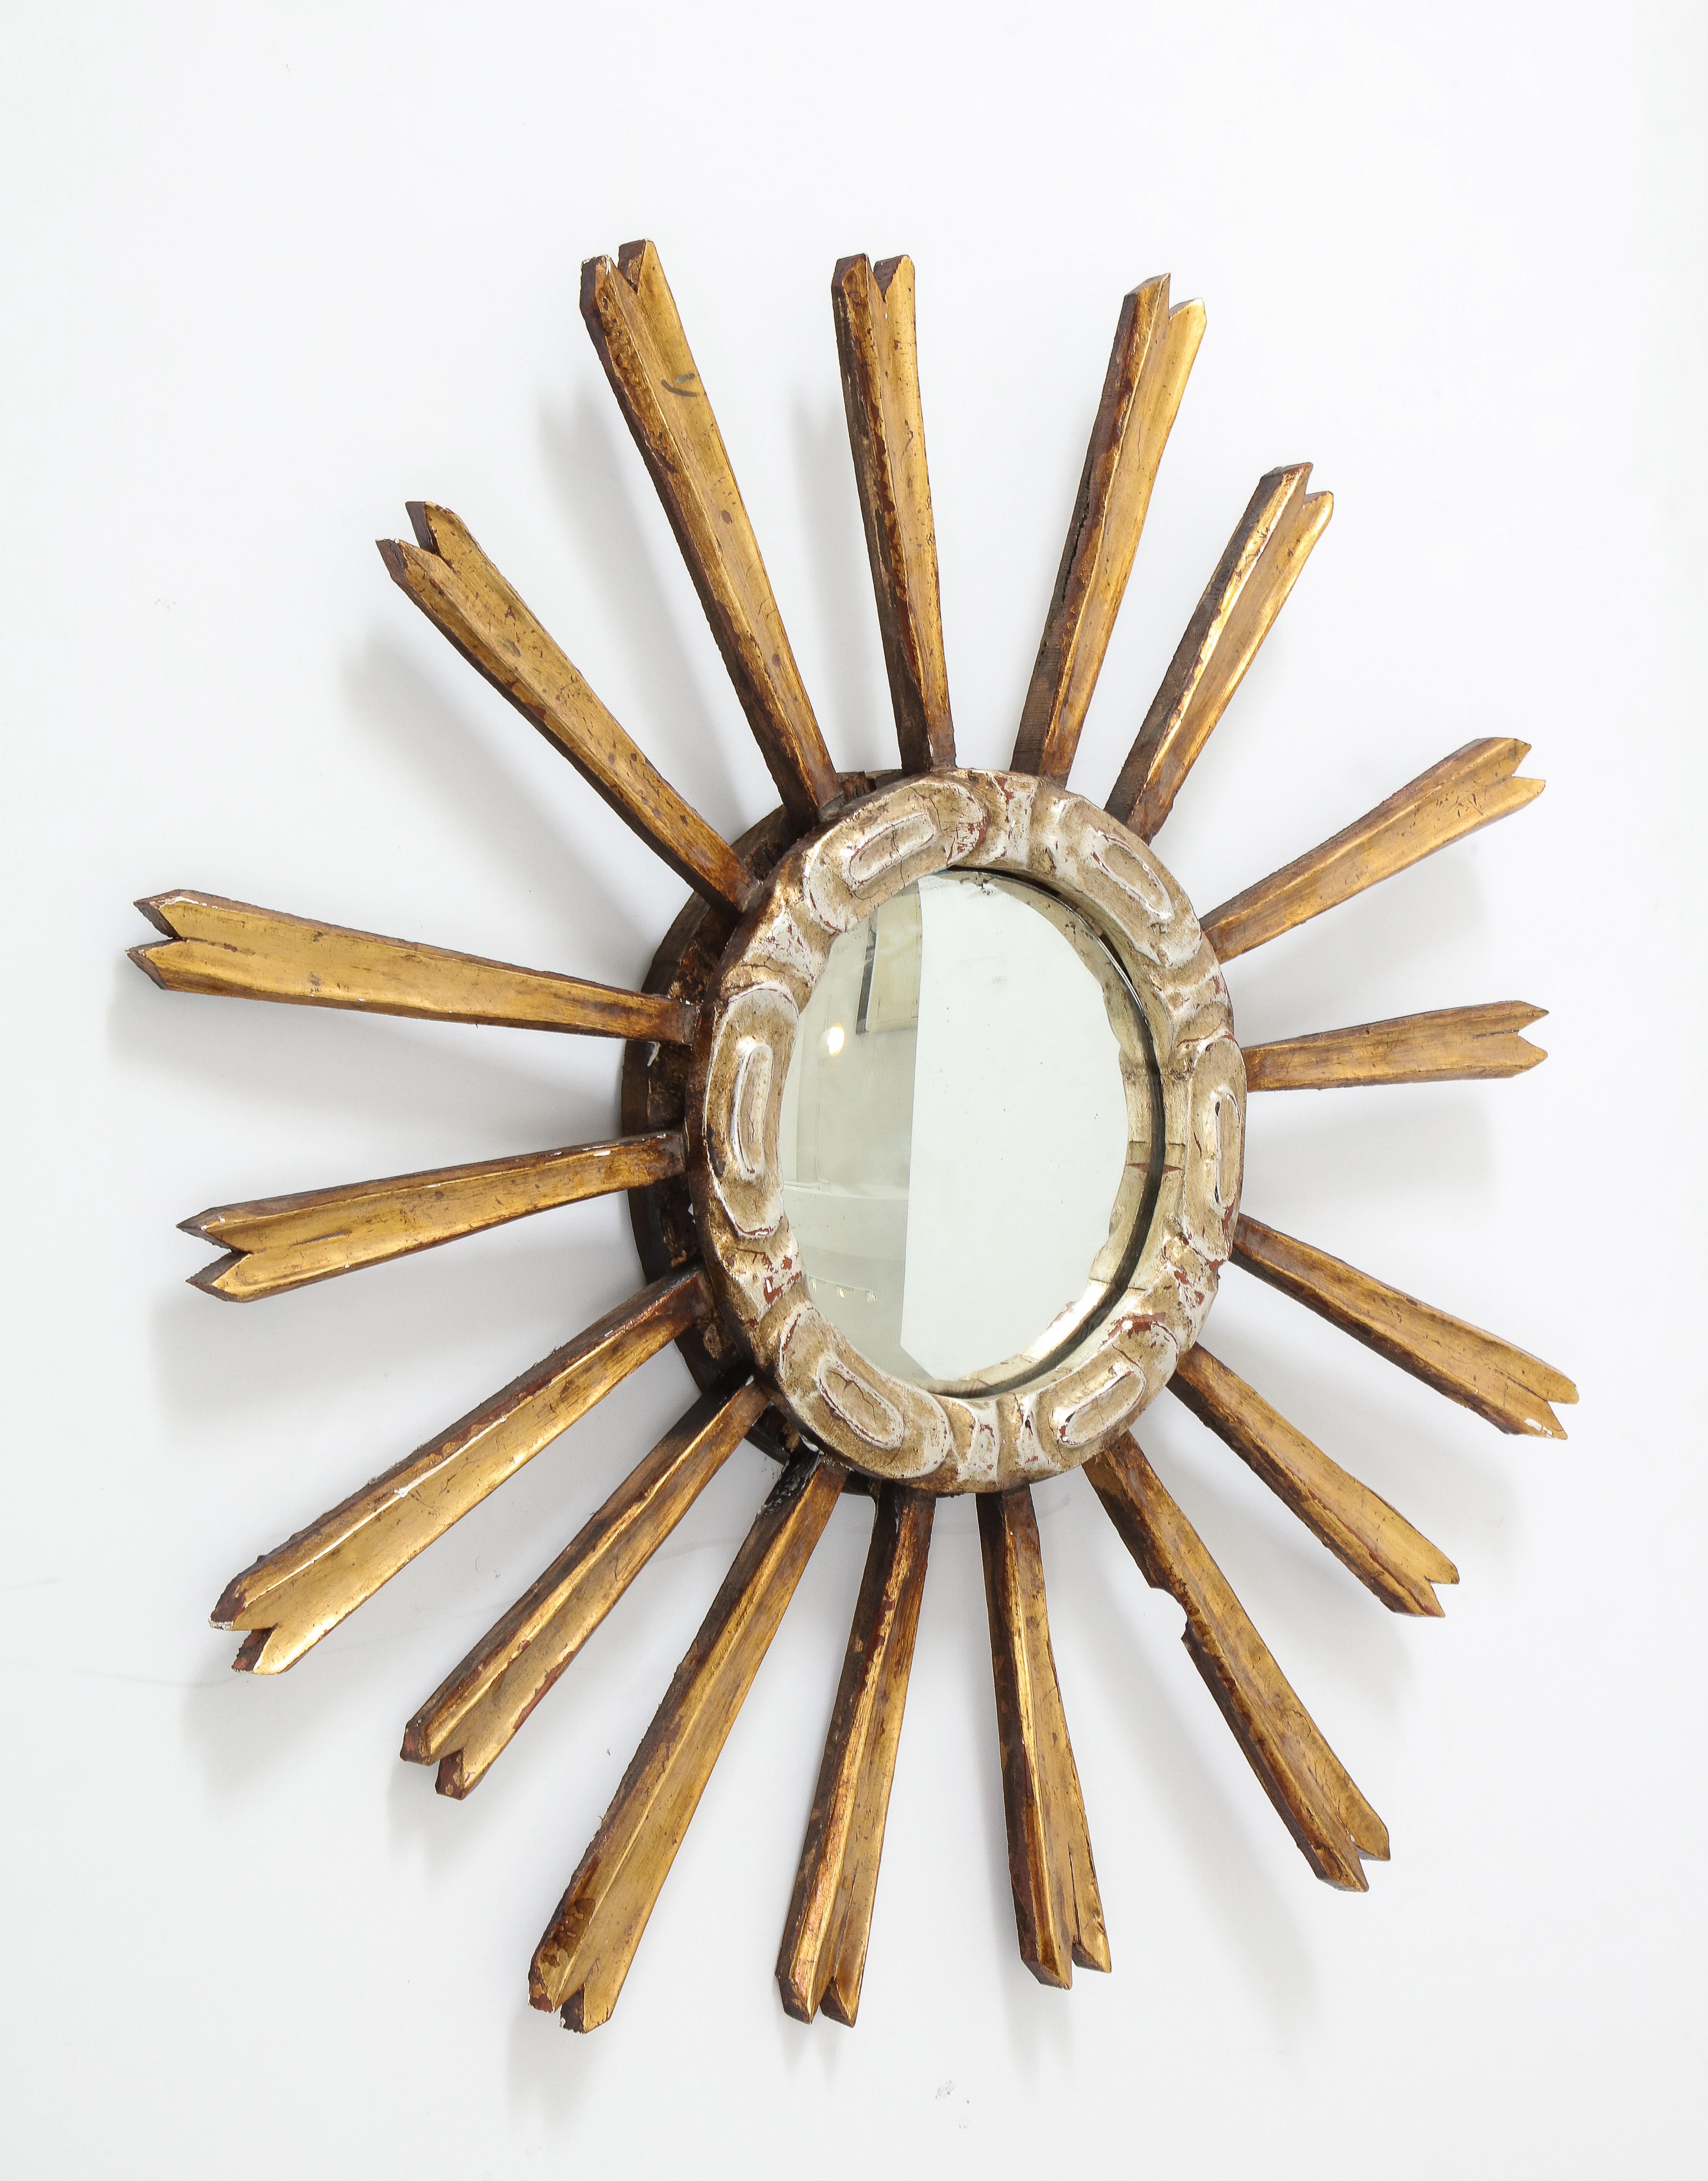 A Sunburst mirror using reclaimed silver and gold rays. The Spanish sunburst mirror is an iconic design that has held the test of time for centuries. This newly-made design uses reclaimed silver and gold carved wood elements to recreate a modern